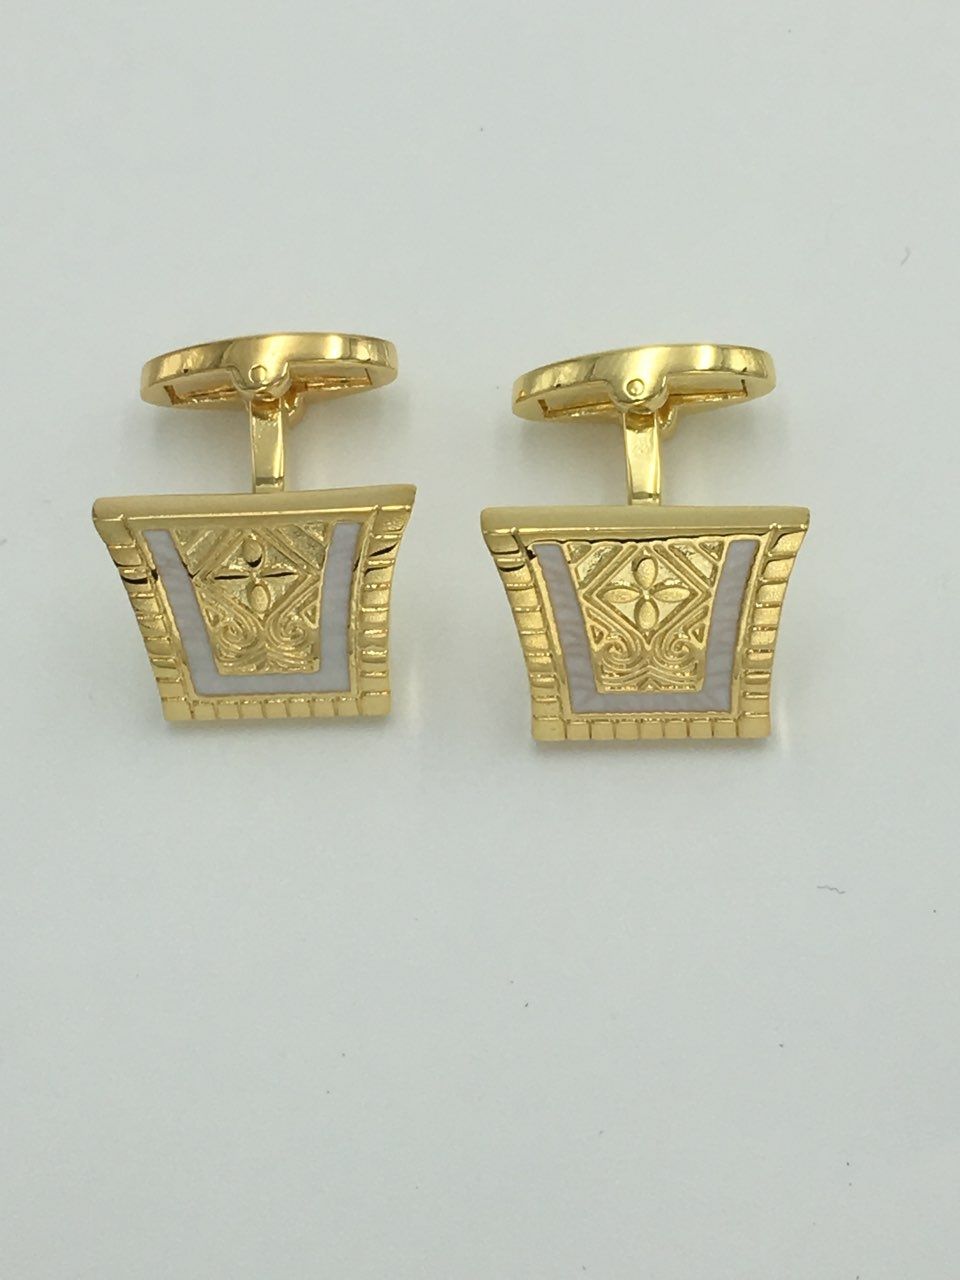 2 Pc. King of the Nile Style Cufflinks - Pure White